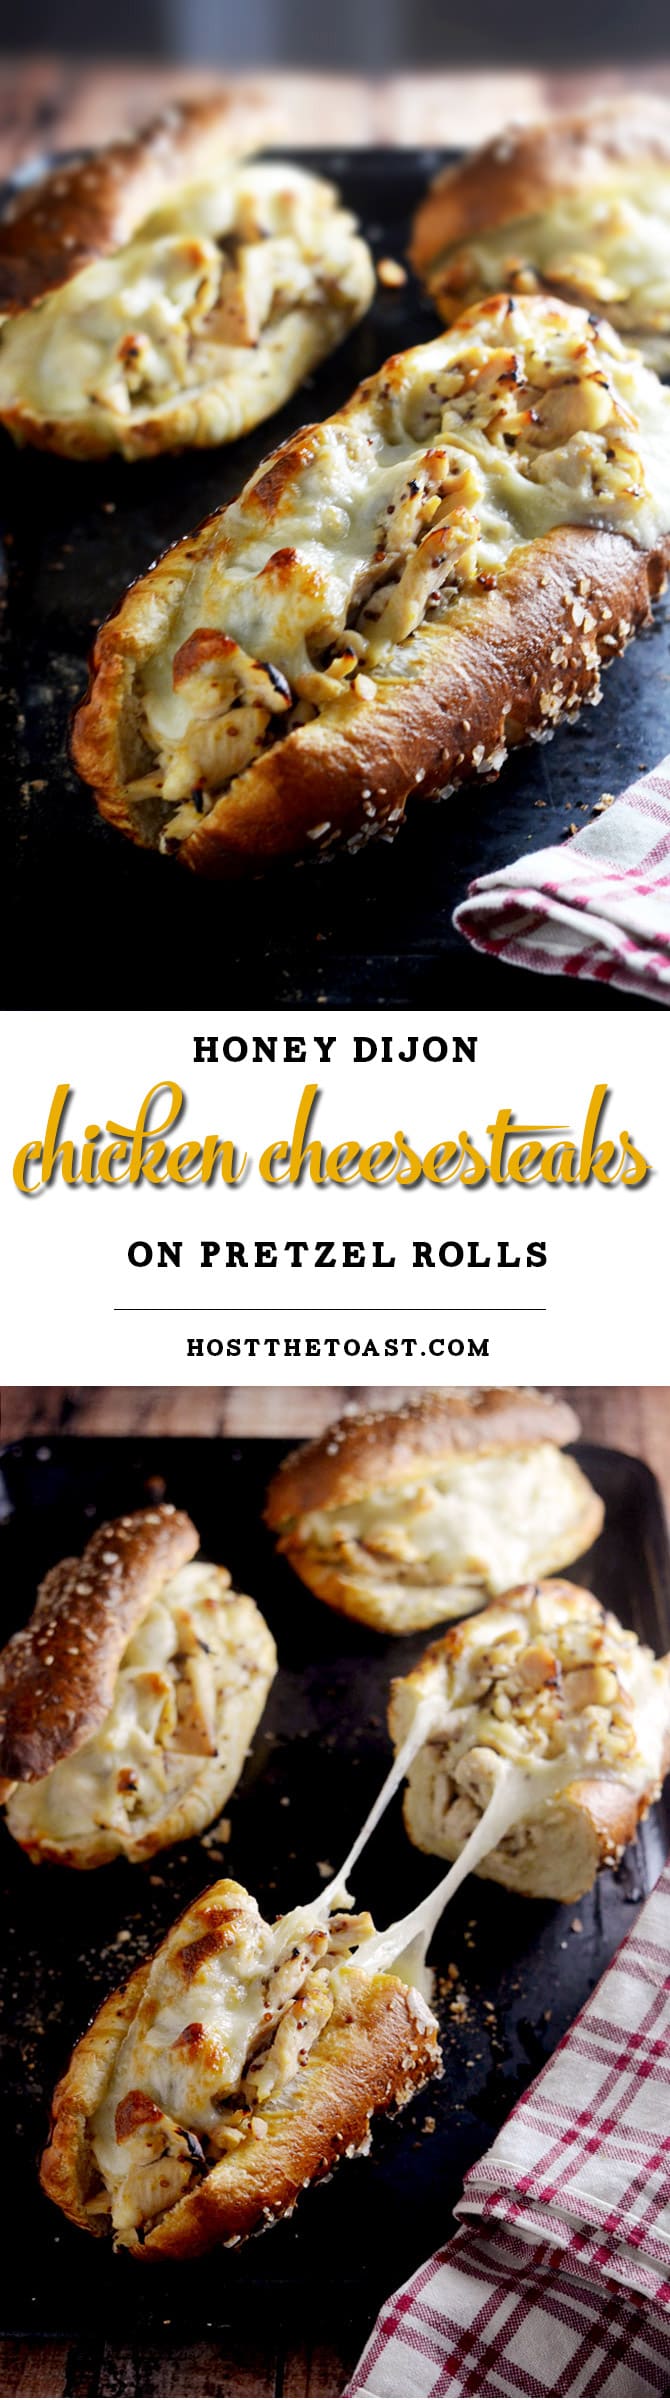 Honey Dijon Chicken Cheesesteaks with Pretzel Rolls. You need to make these ASAP. The pretzel rolls are made with frozen bread and baking soda! | hostthetoast.com